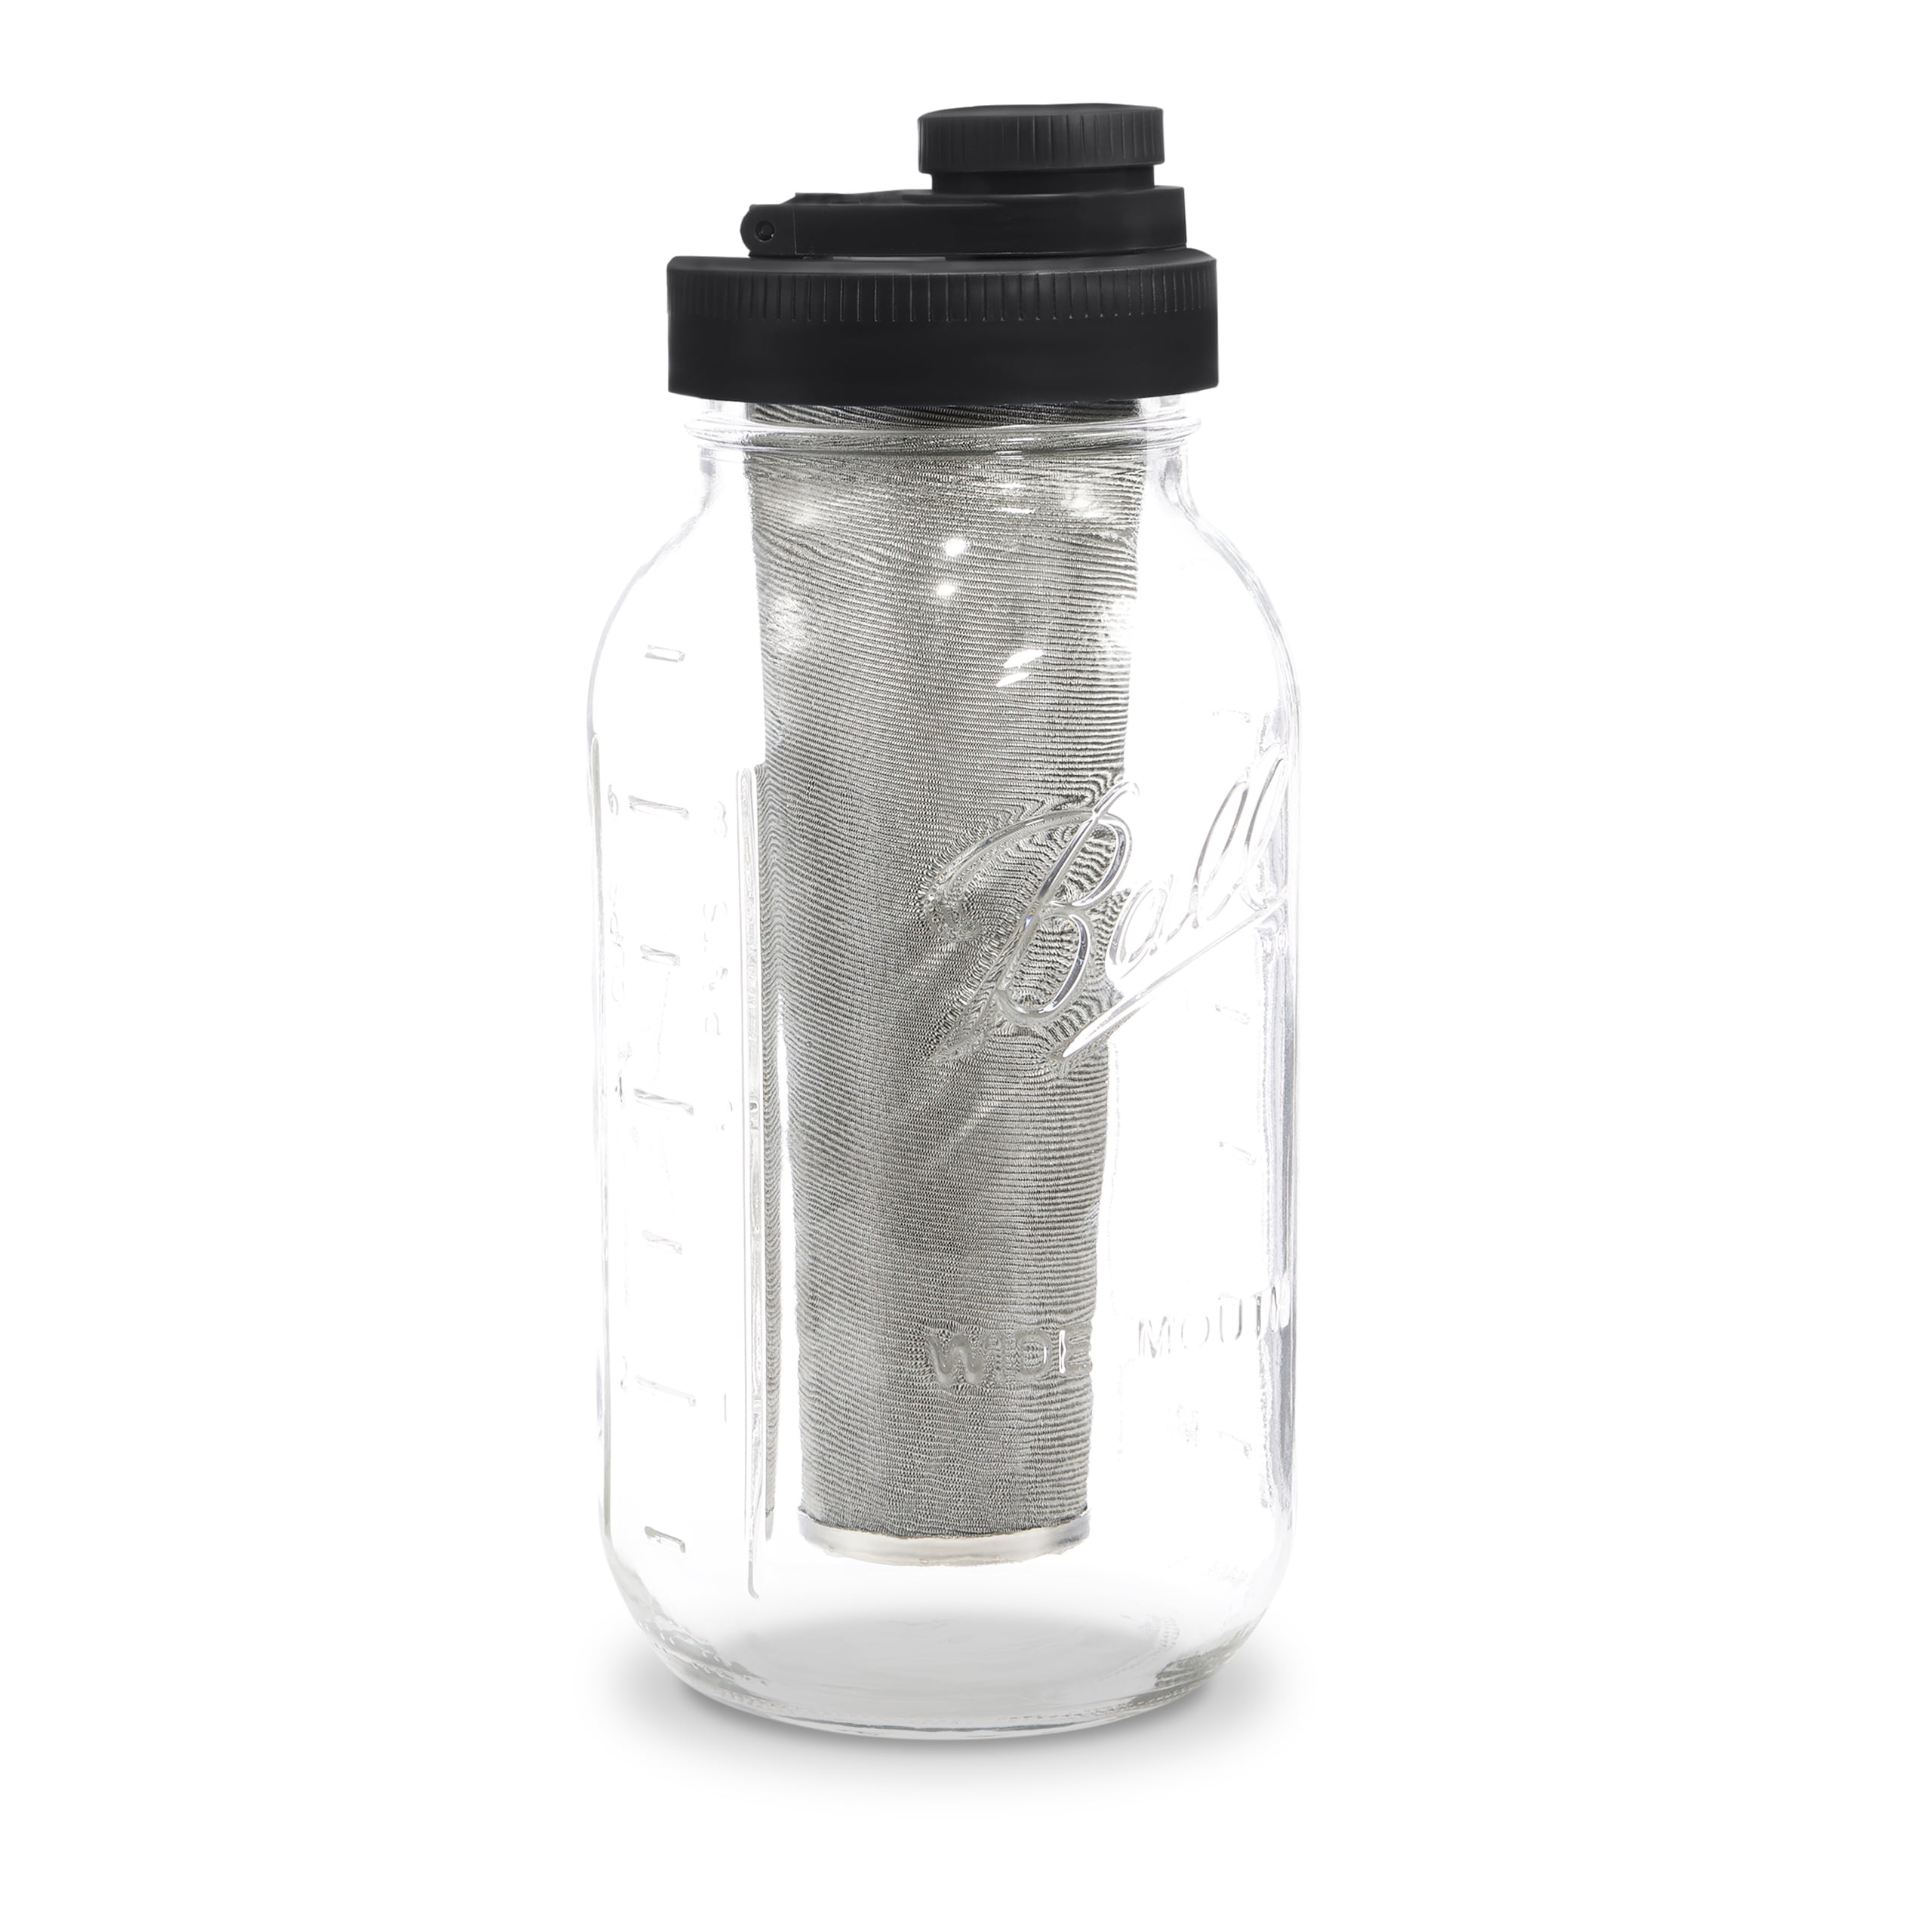 Stainless Steel Filter for Use With 2 Quart Wide Mouth Mason Jars 